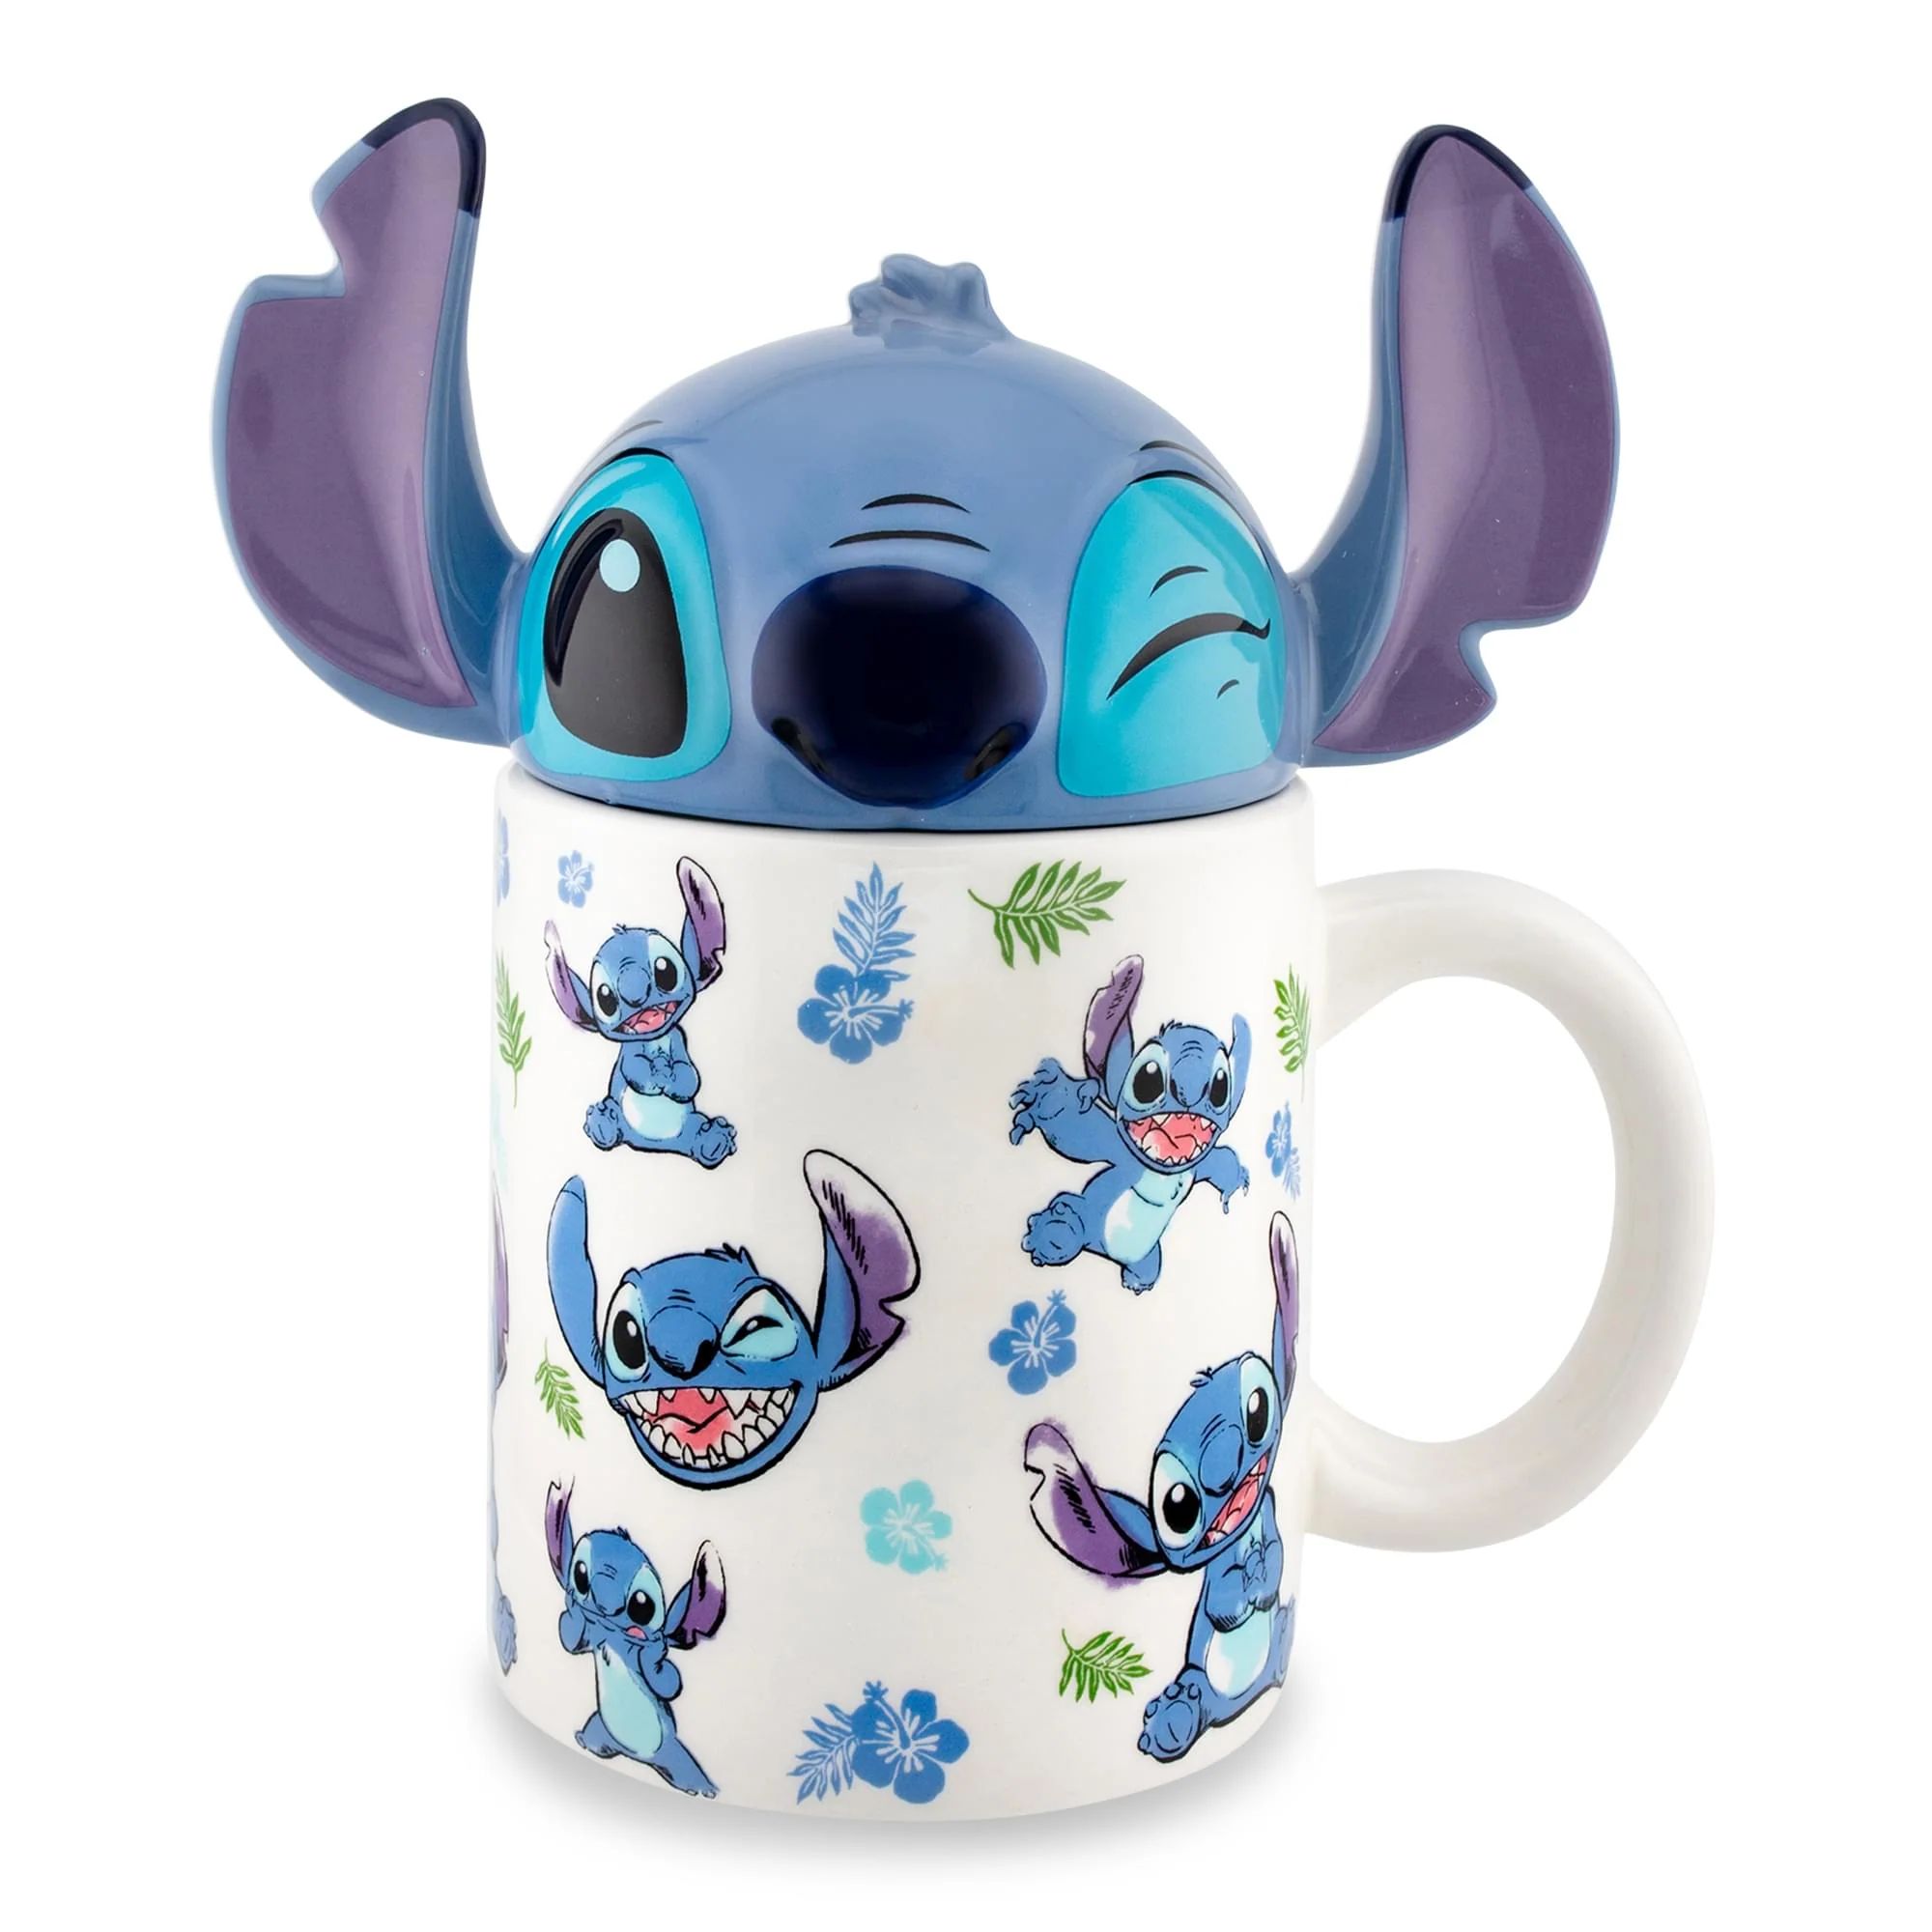 Disney Lilo & Stitch Ceramic Mug With Sculpted Topper | Holds 18 Ounces | Toynk